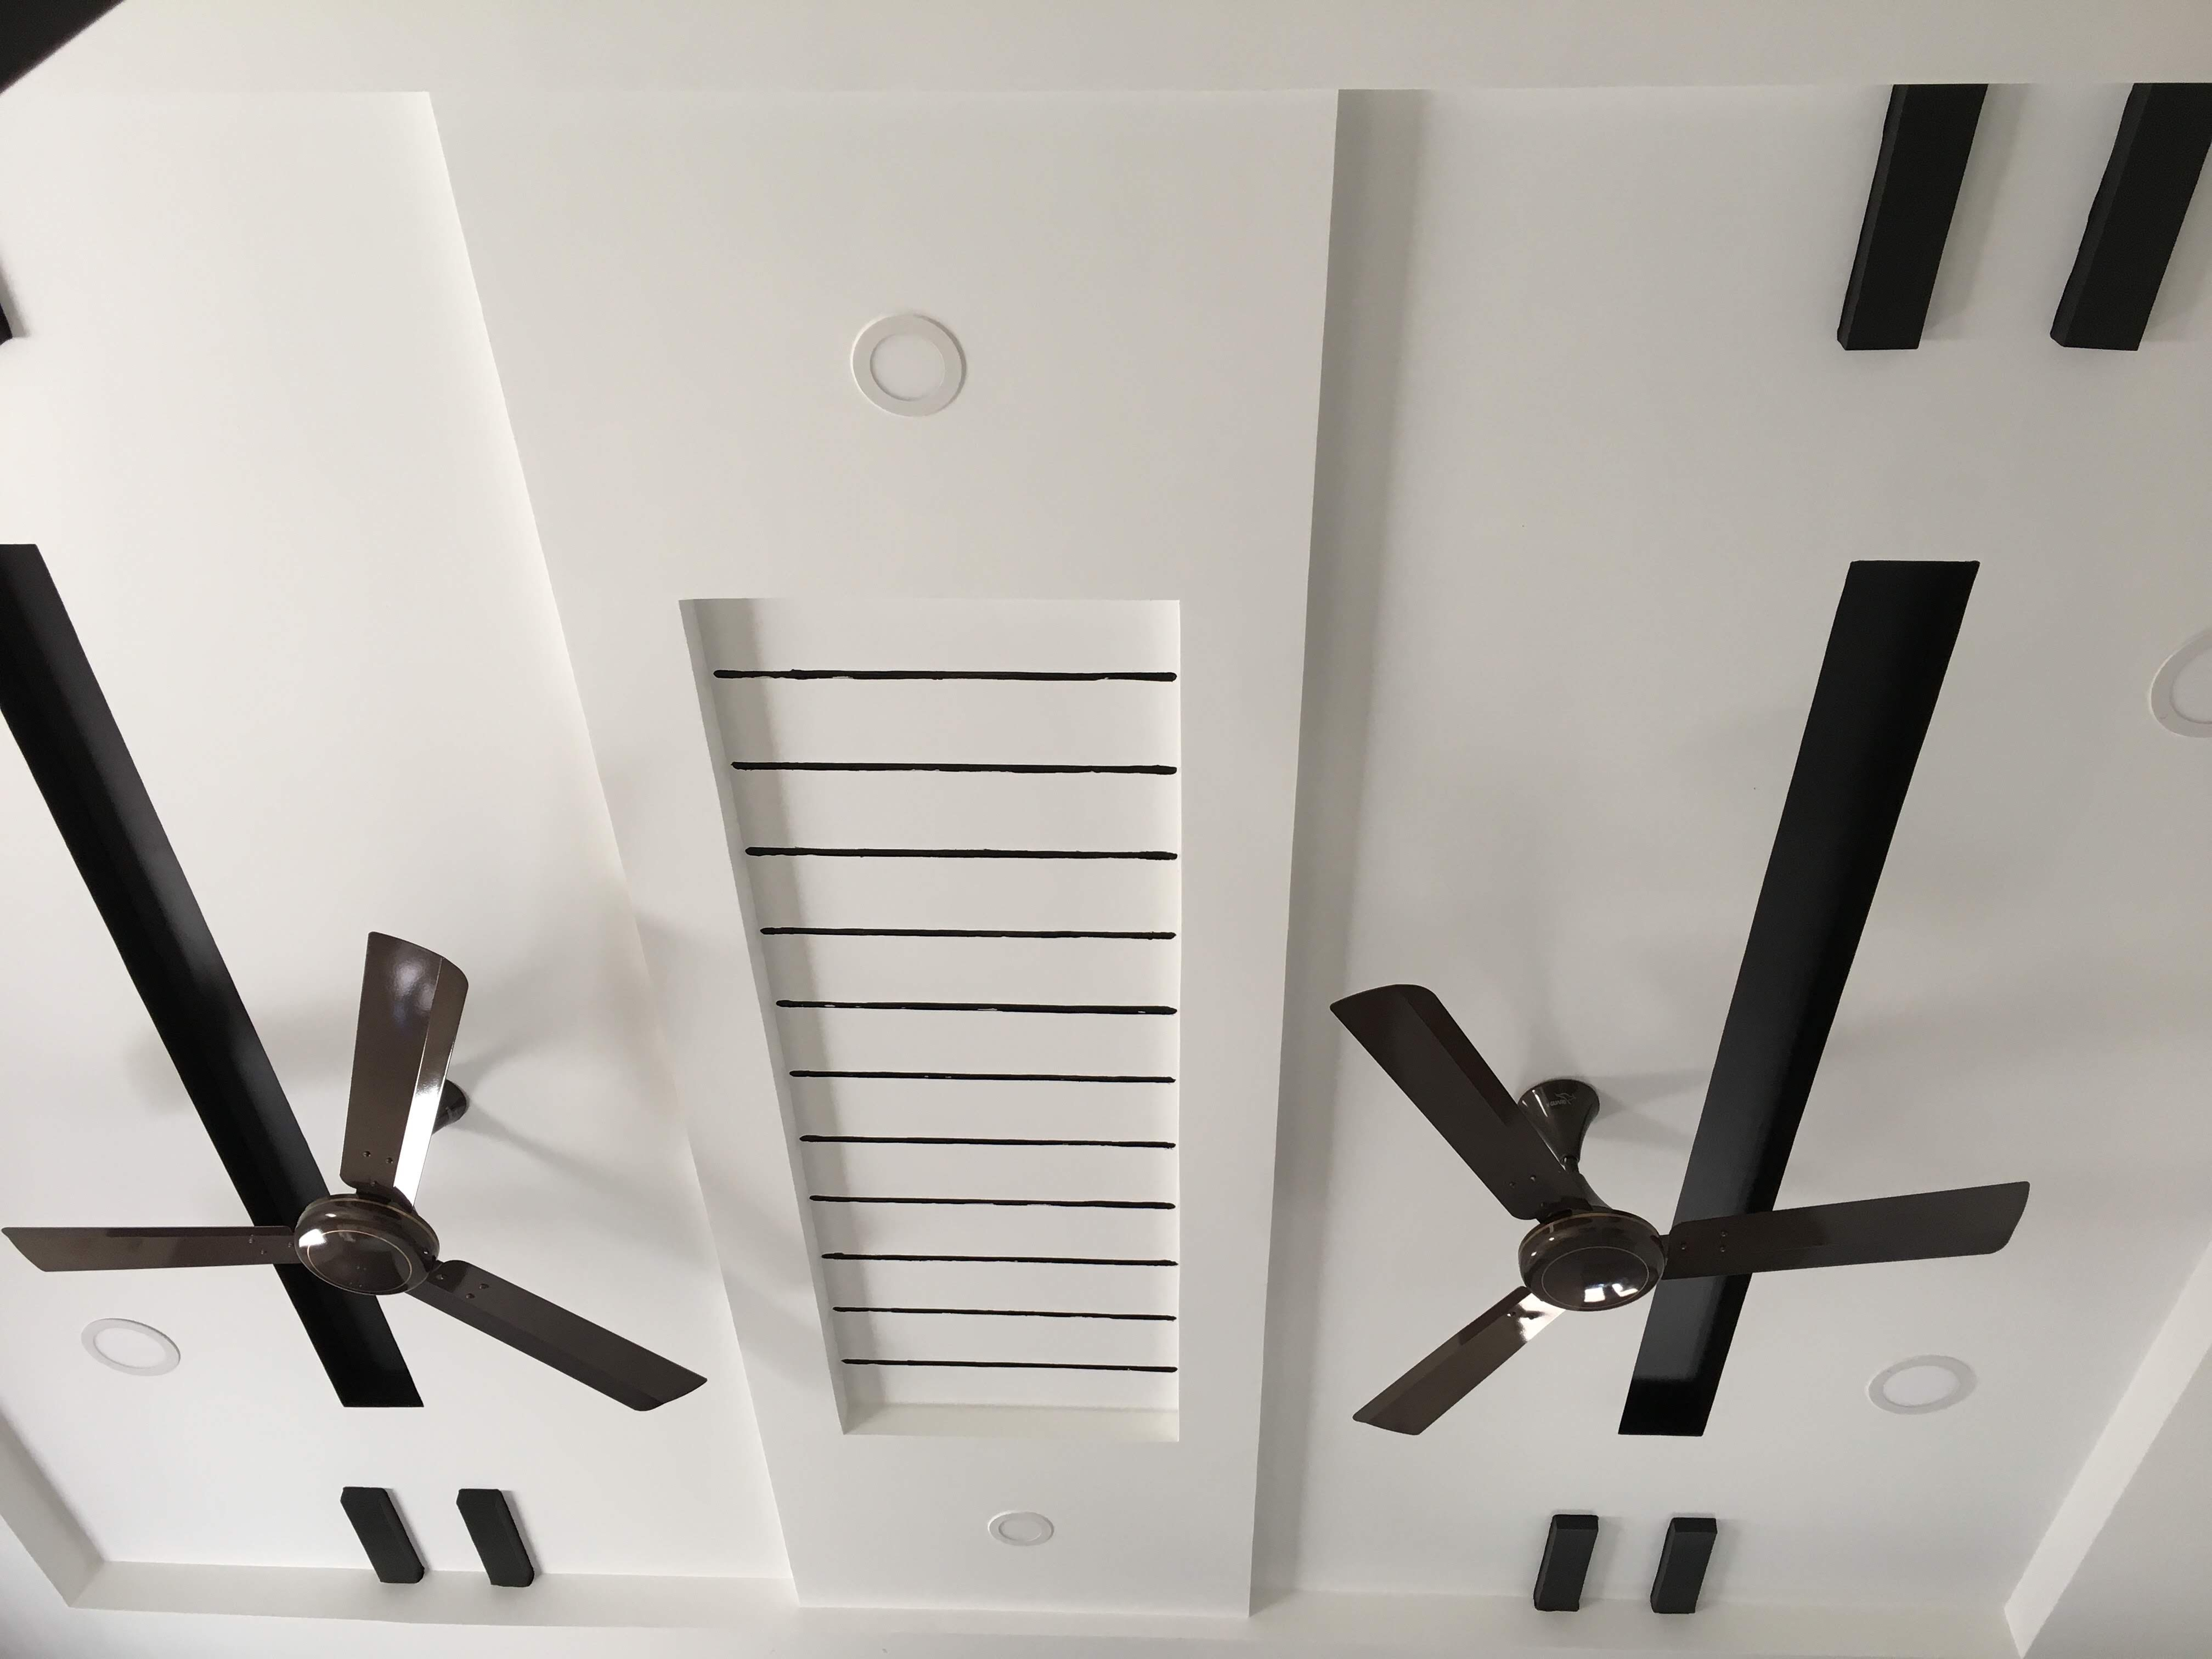 False ceiling design with two fans